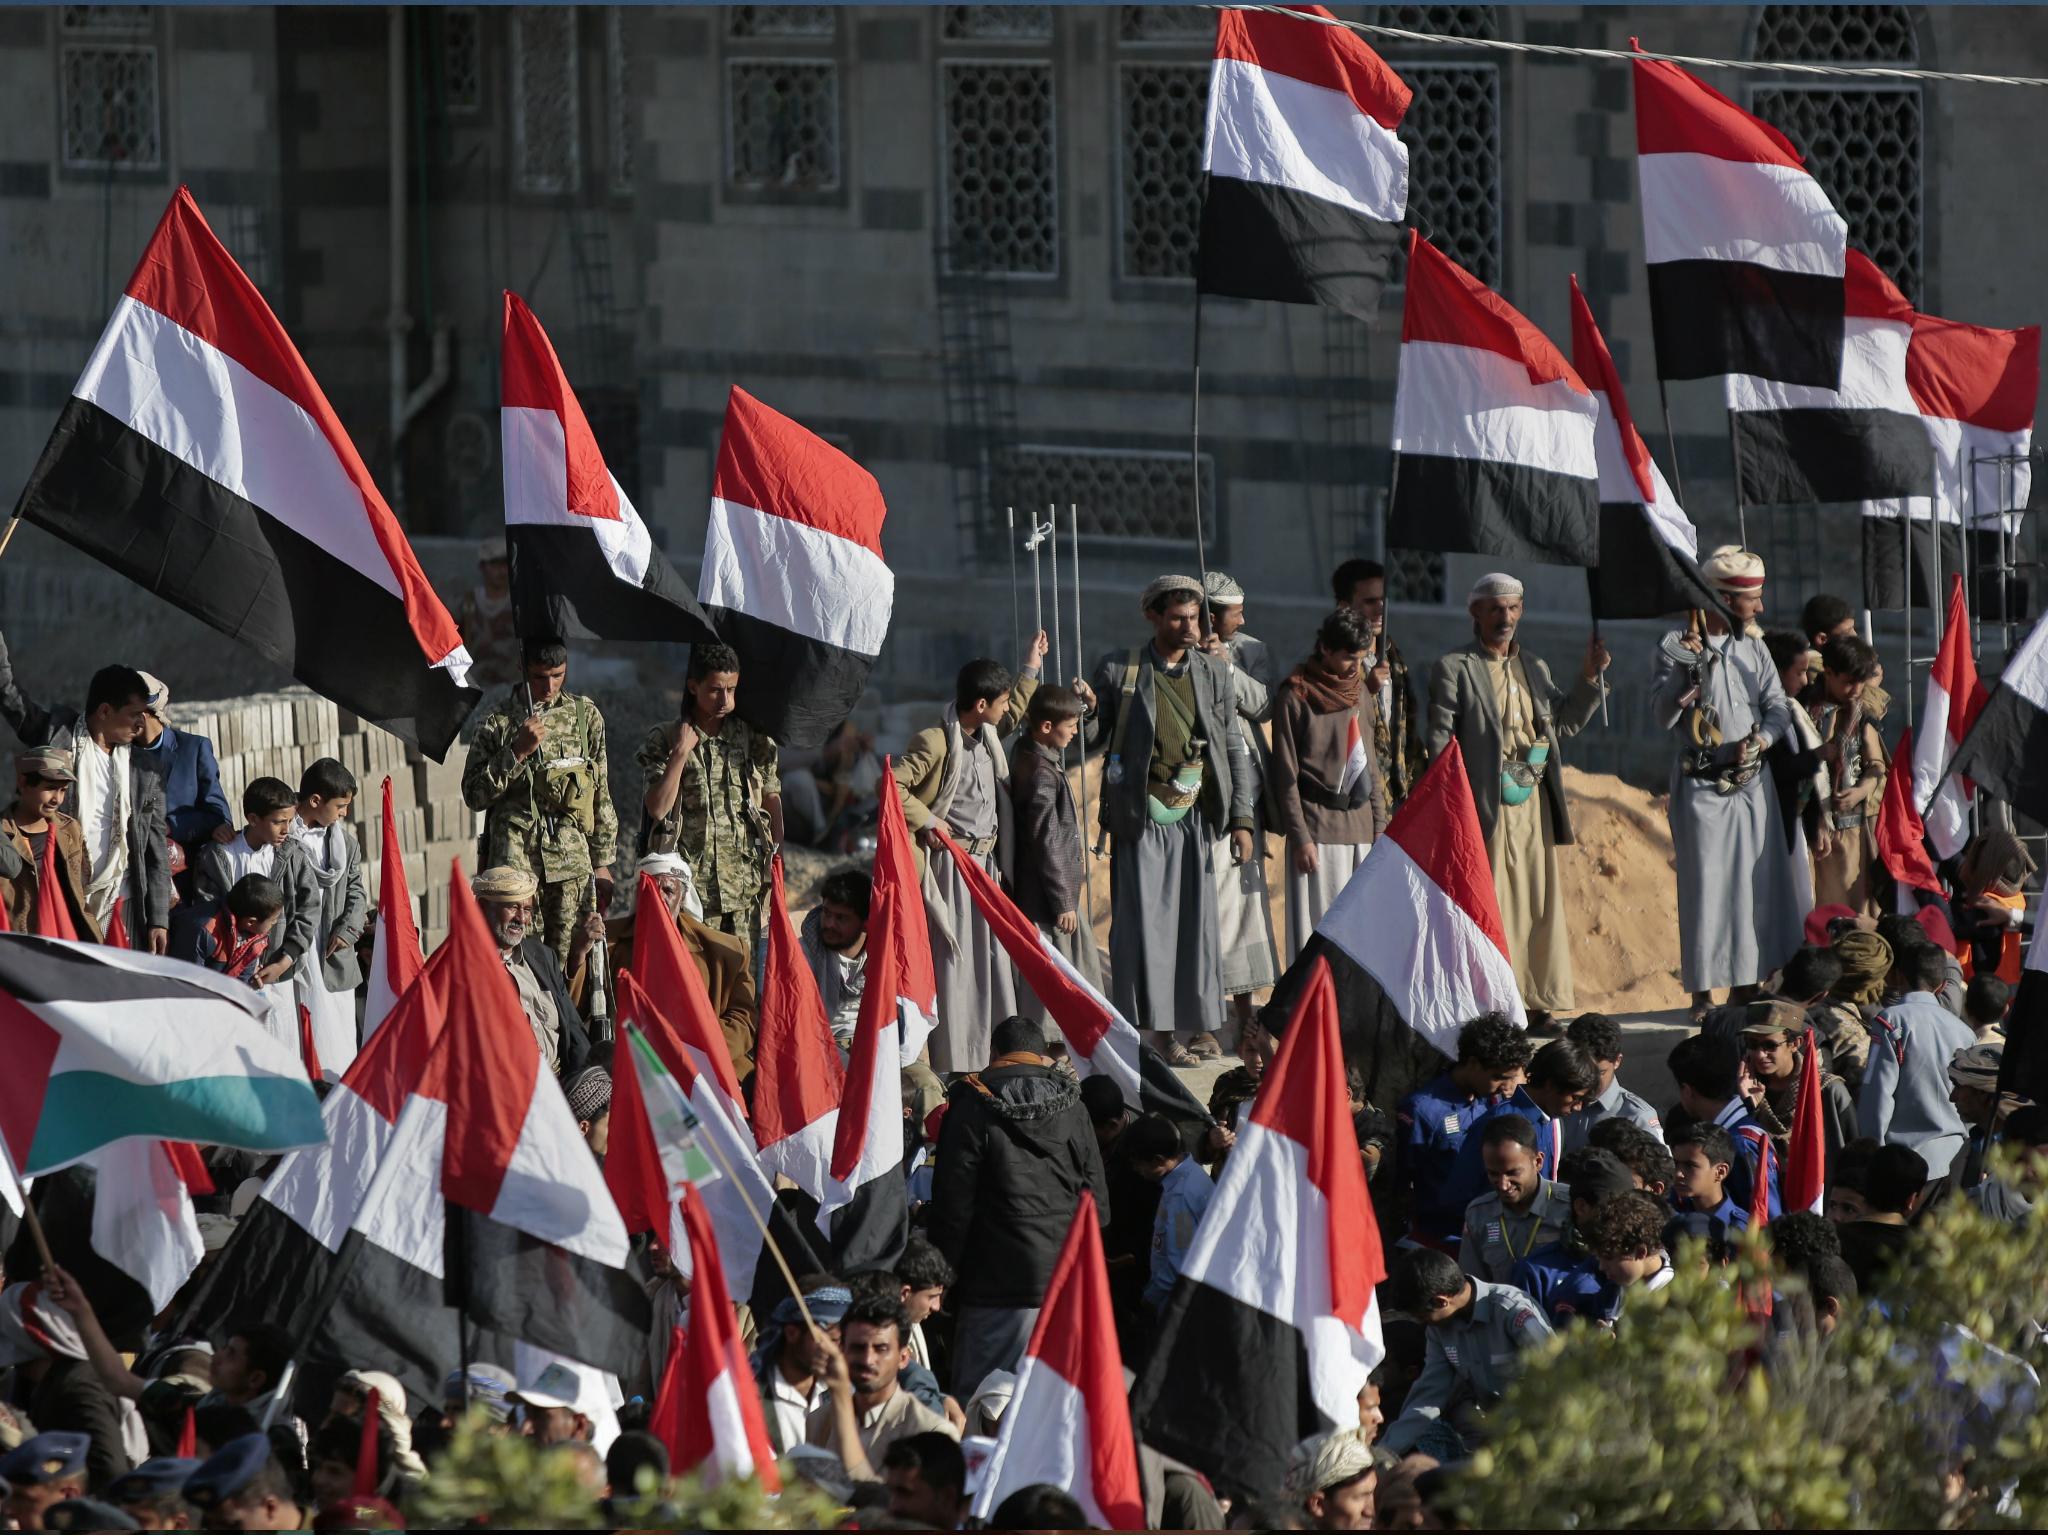 Supporters of Shiite Houthi rebels attend a rally in Sanaa, Yemen on 5 December 2017.